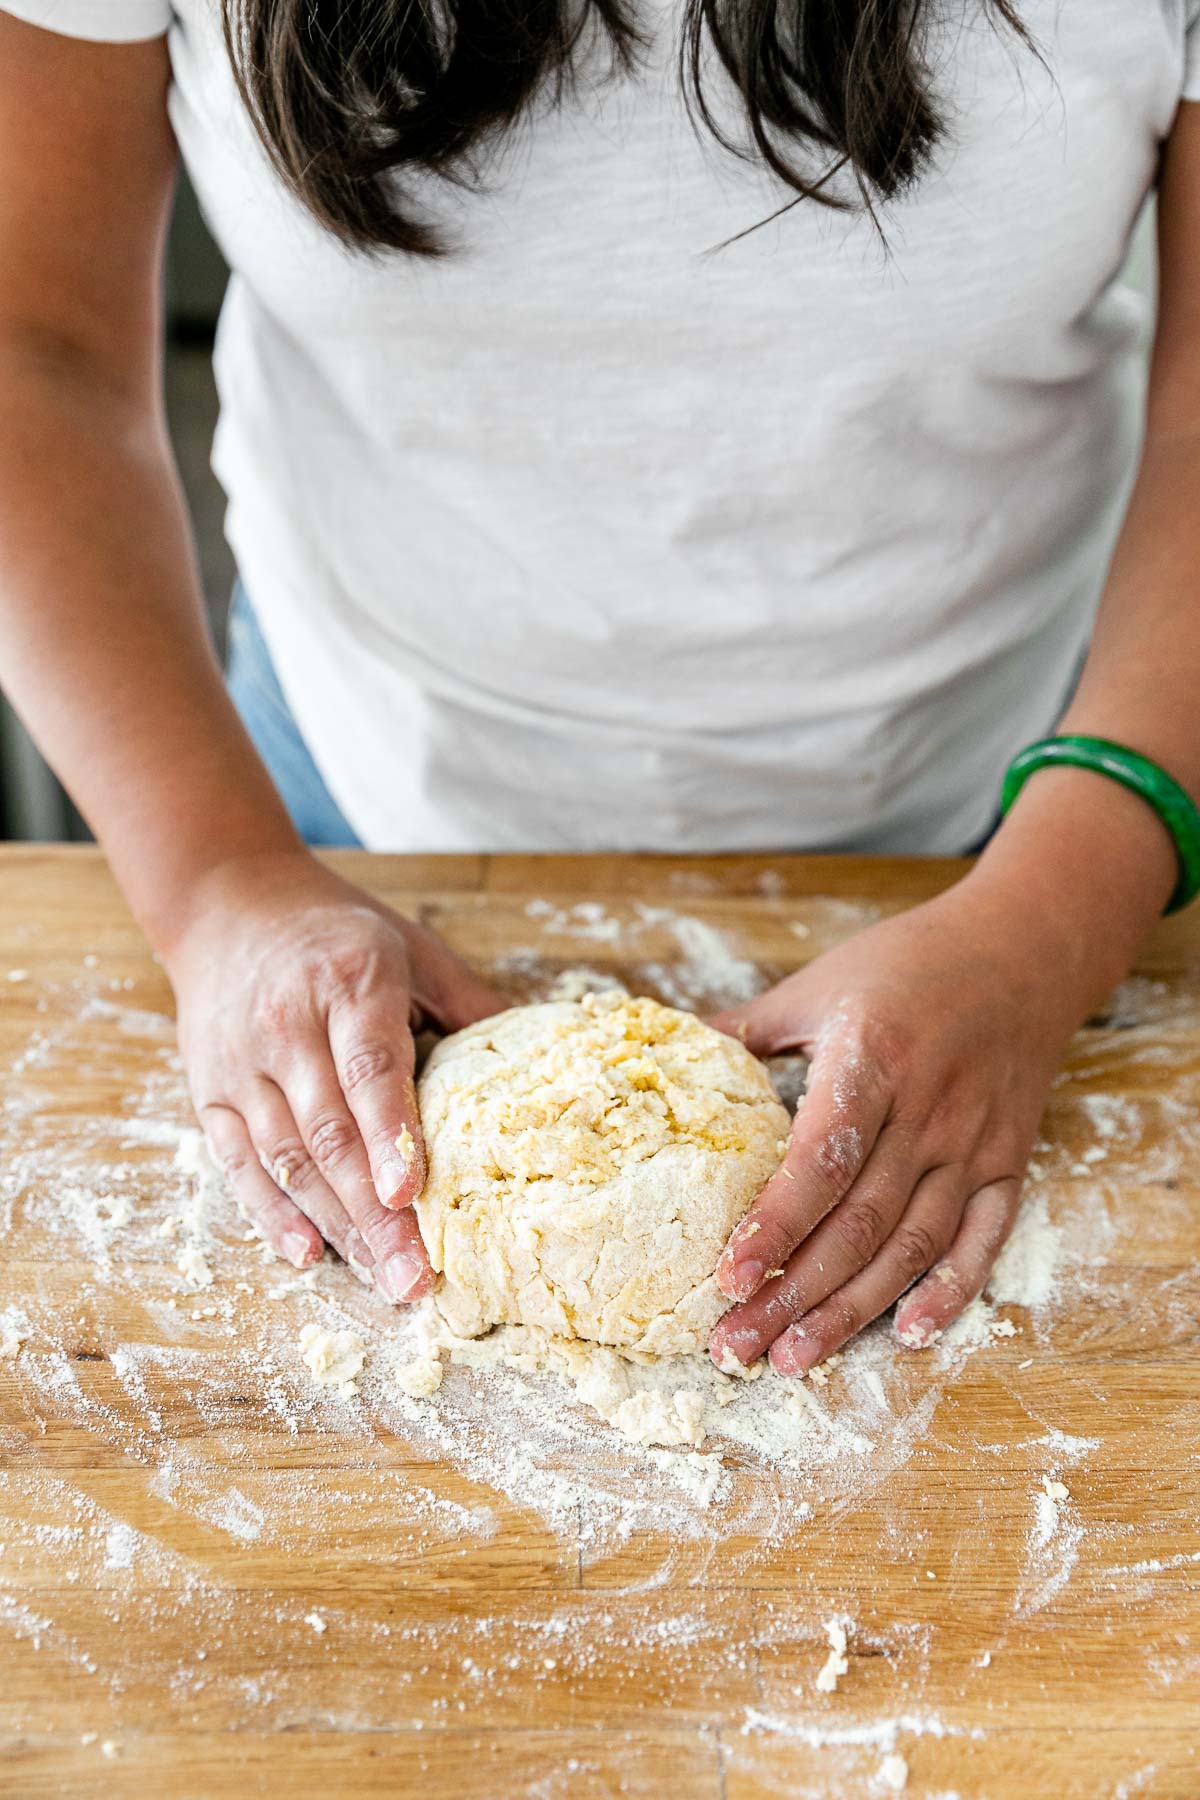 How to Make Homemade Pasta, Step 2: Mixing the Pasta Dough. Jess of Plays Well With Butter places her hands around a dough ball of fresh pasta dough. The dough ball sits atop a butcher block countertop that is dusted with flour from the process of mixing & forming the dough ball.